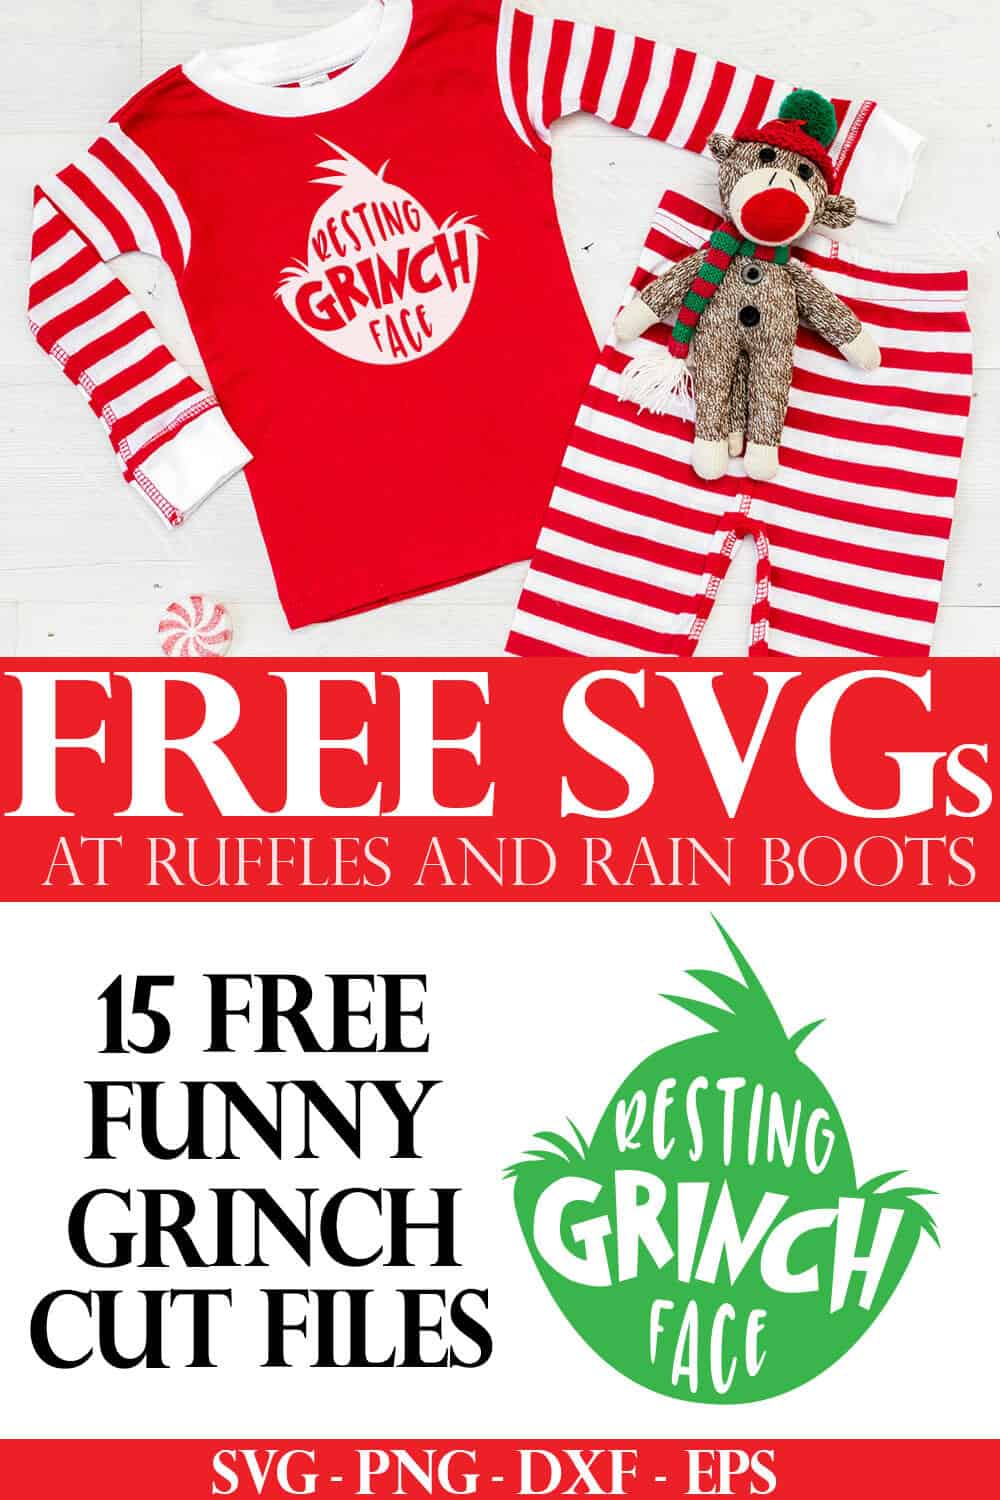 adorable Christmas pajamas made with free Grinch head SVG cut files for holiday crafts with text which reads free svg from ruffles and rain boots